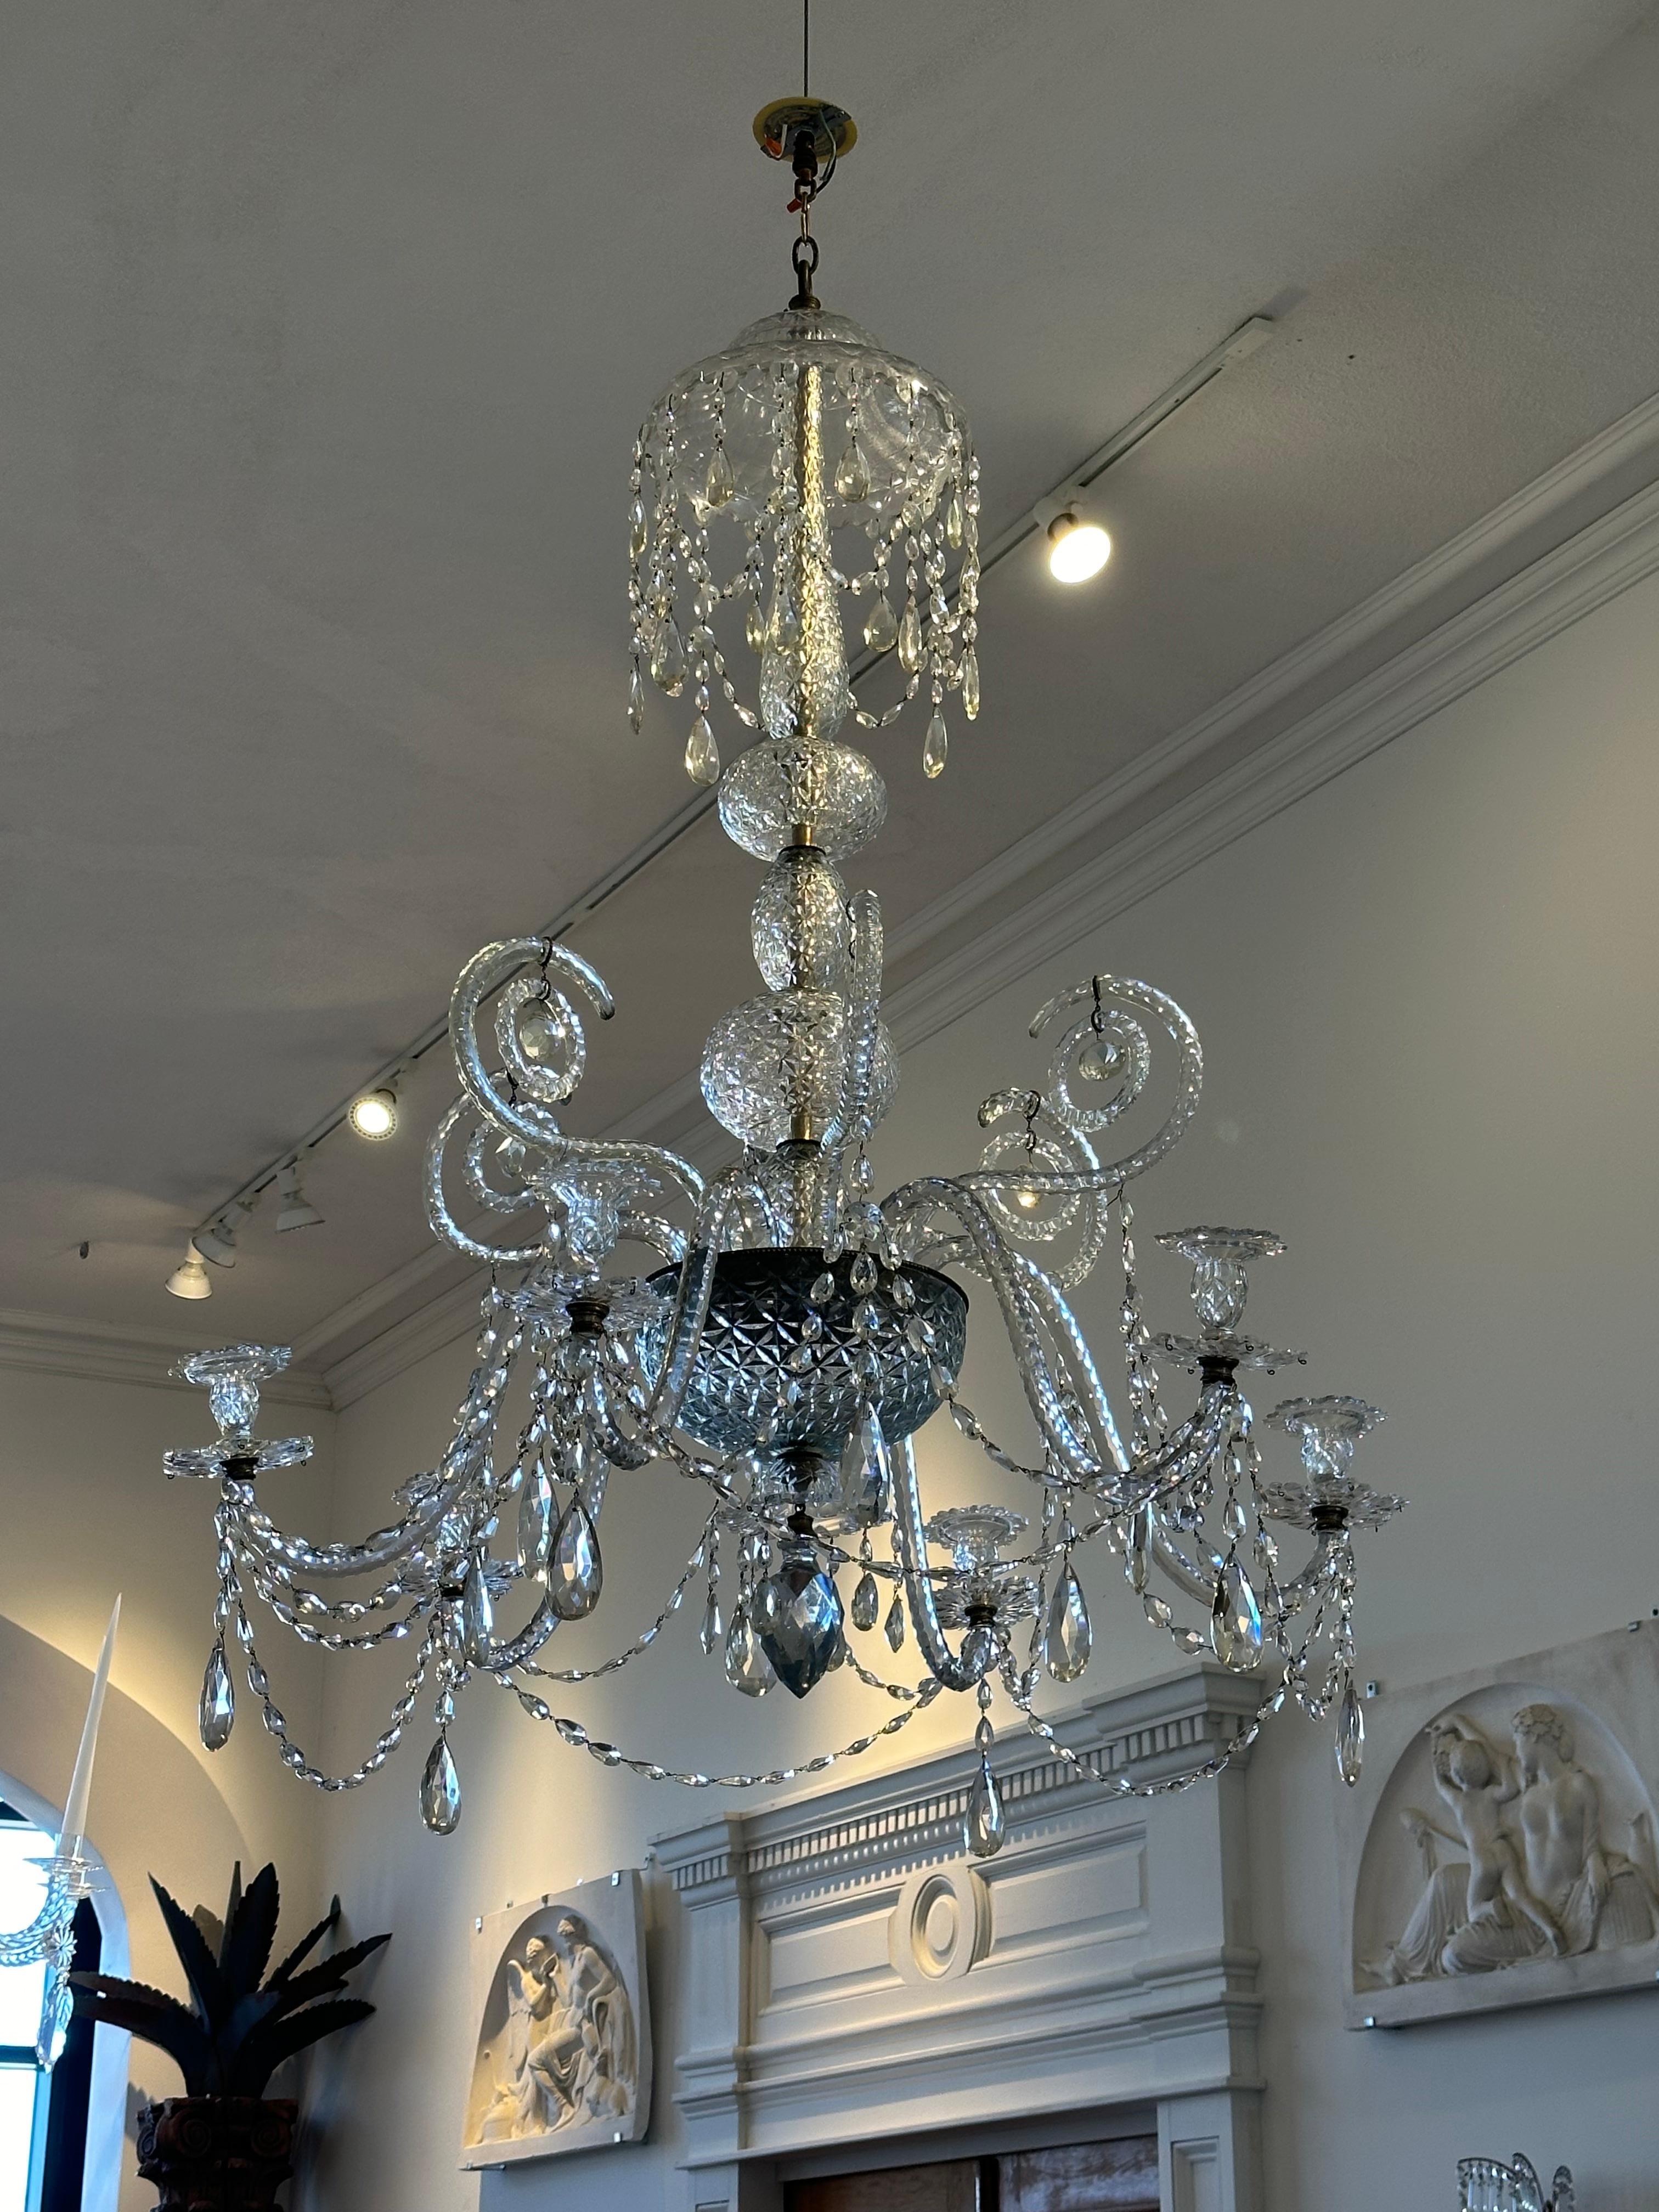 18th century Georgian cut crystal chandelier of large scale and wonderful design. Original crystal exhibiting greyish color quality from production in Derby during the 18th century (also known as Derby Blue in the 18th century).